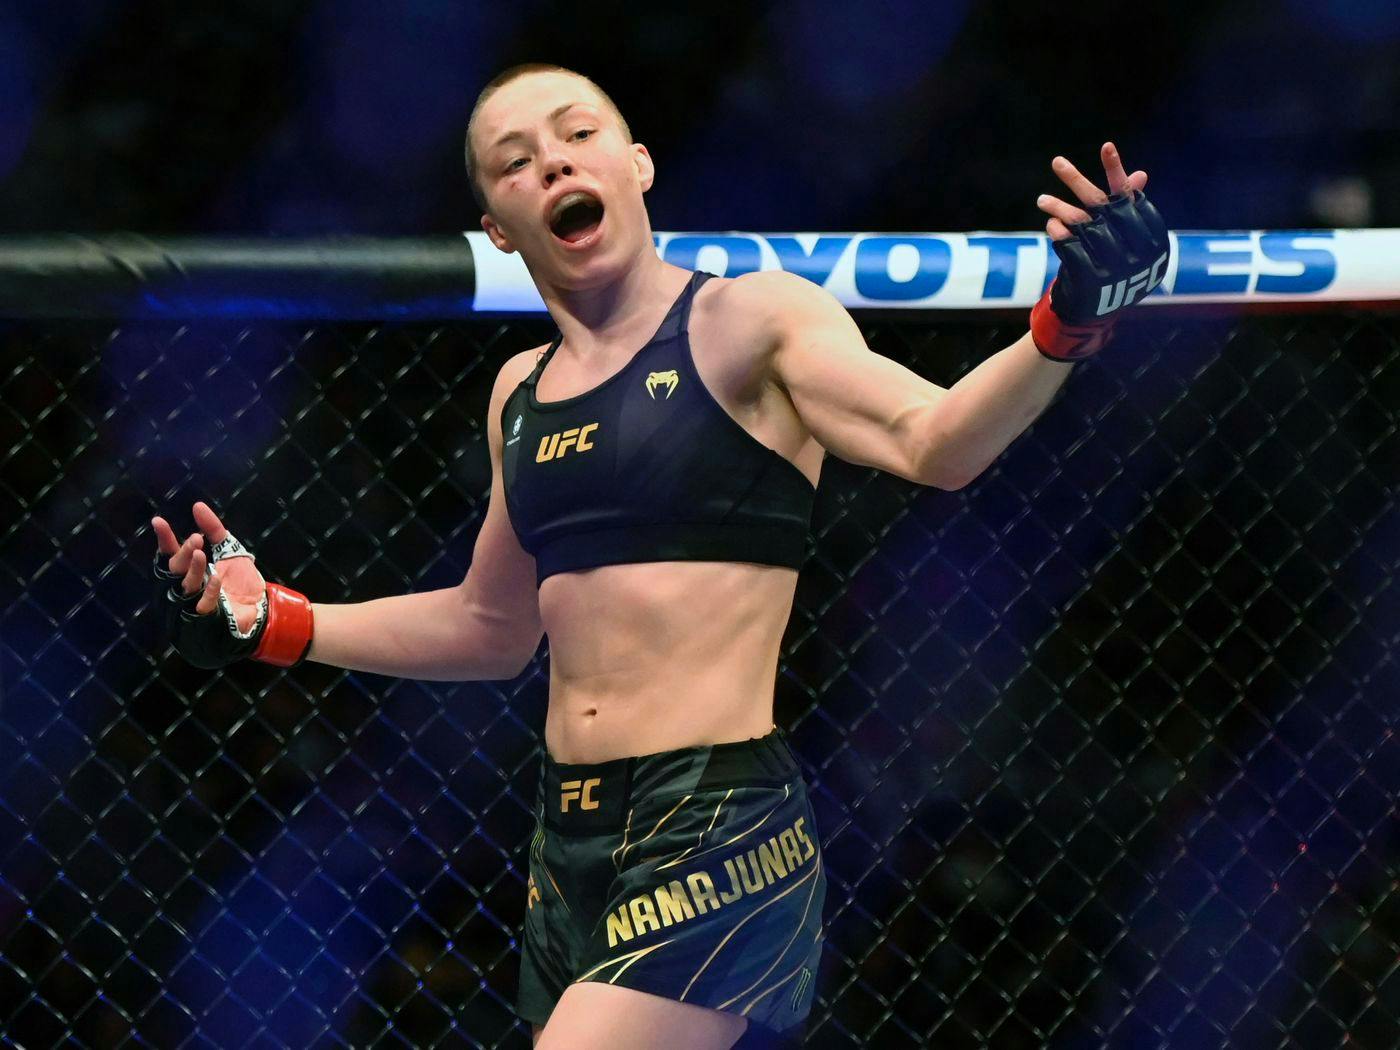 862: MMA PREVIEW: Is Namajunas two-weight UFC champ material? Why McGregor’s return is stalling and what antitrust lawsuit settlement means for UFC